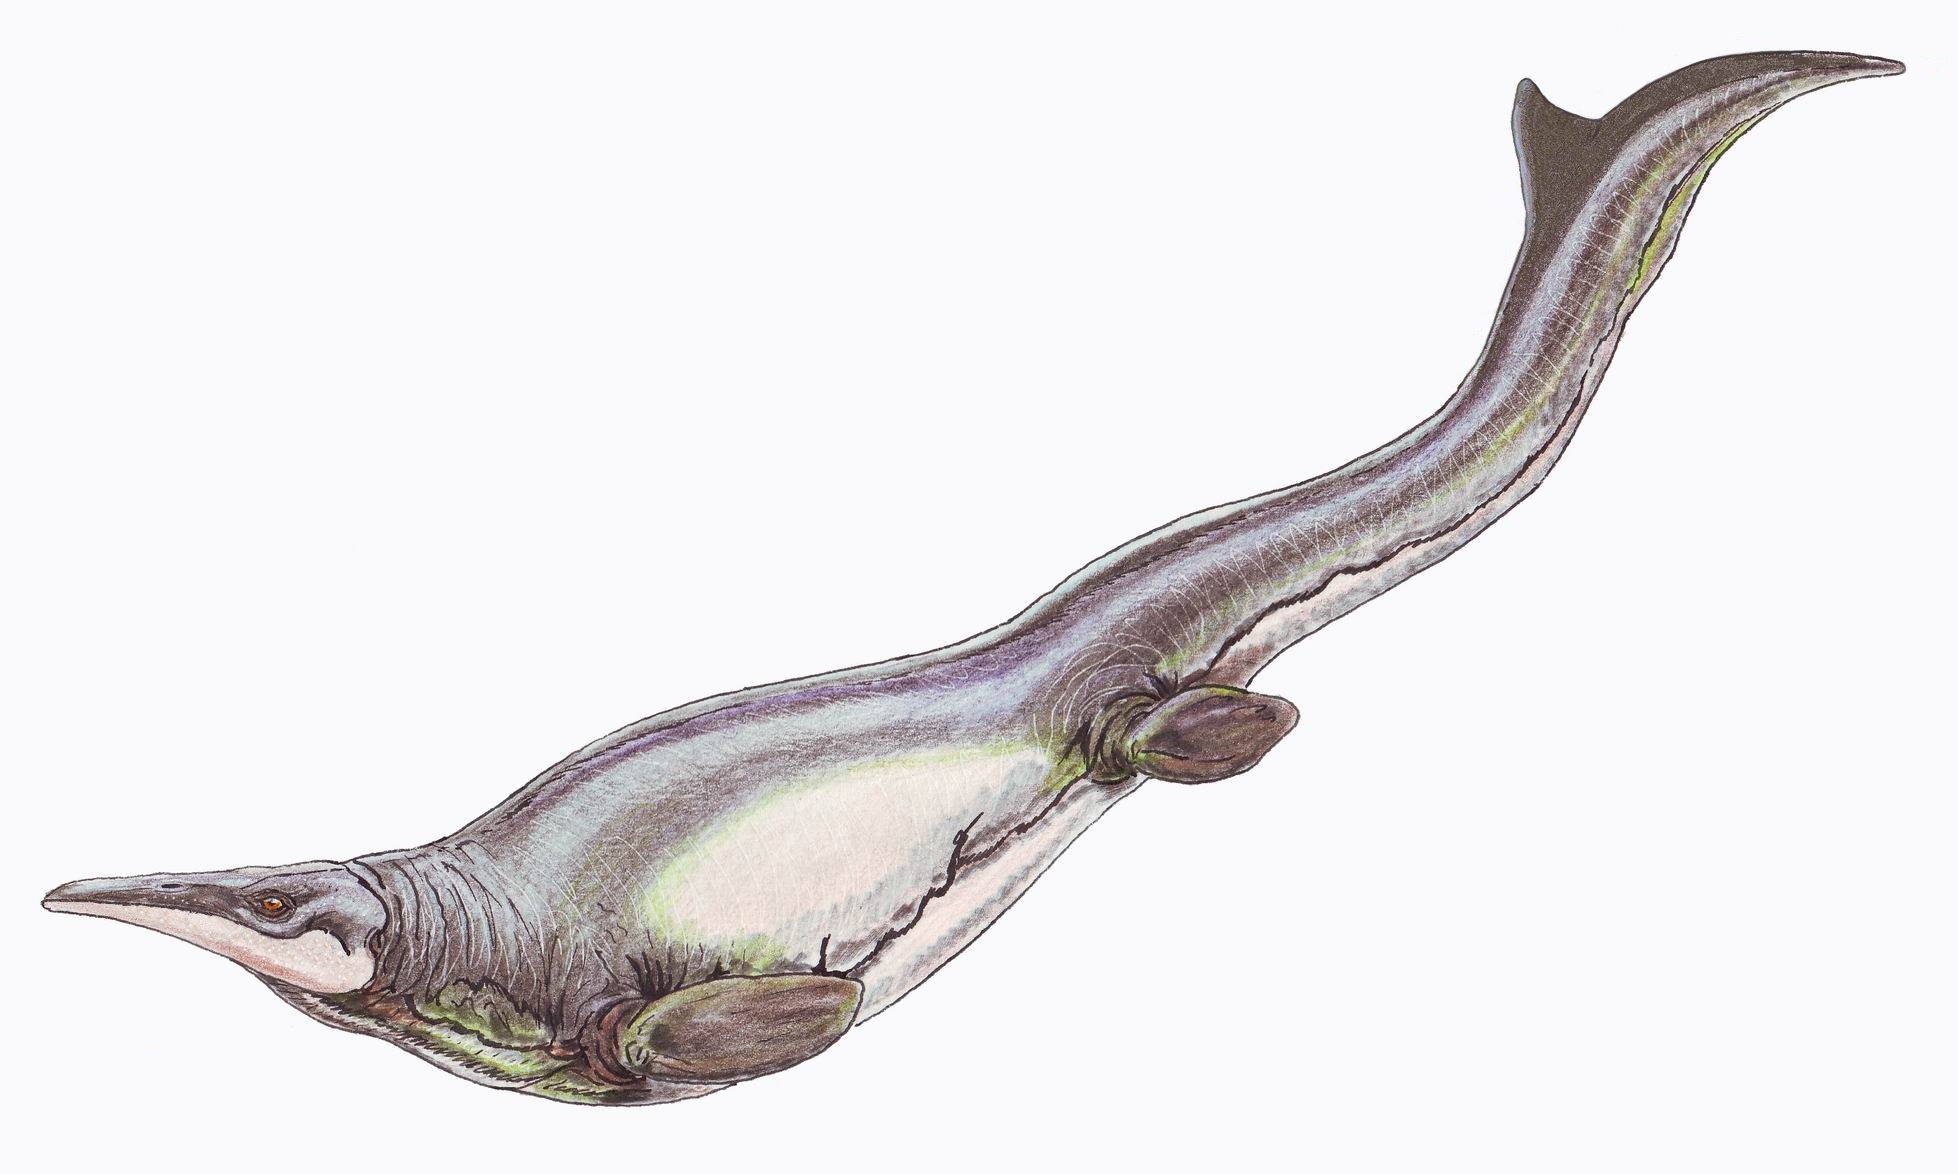 Ideas, Inventions And Innovations : Did Mosasaurs Do the Breast ...